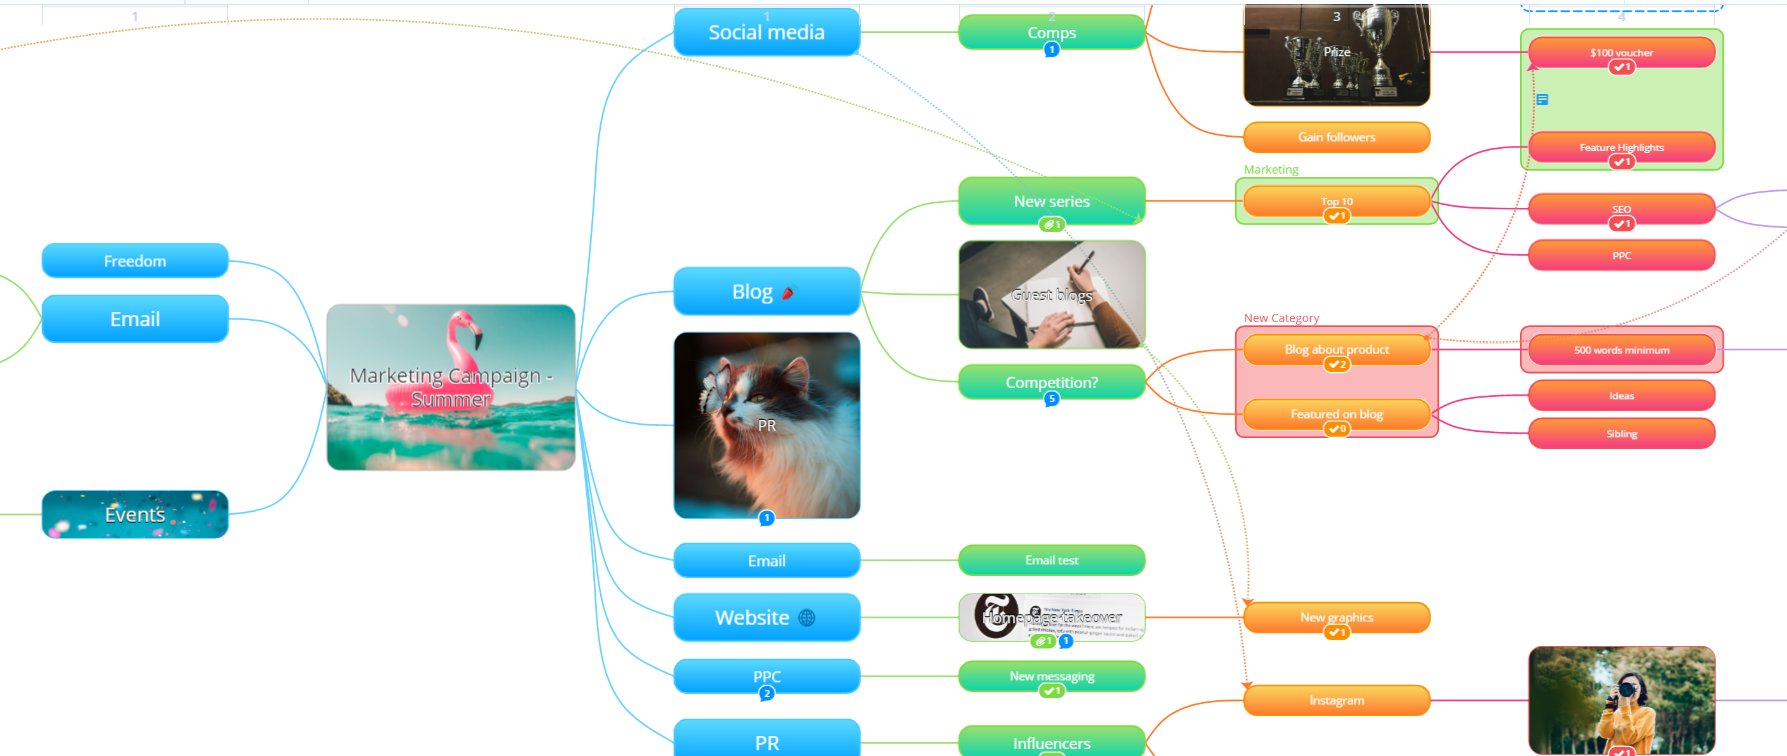 View of the opened mind map.